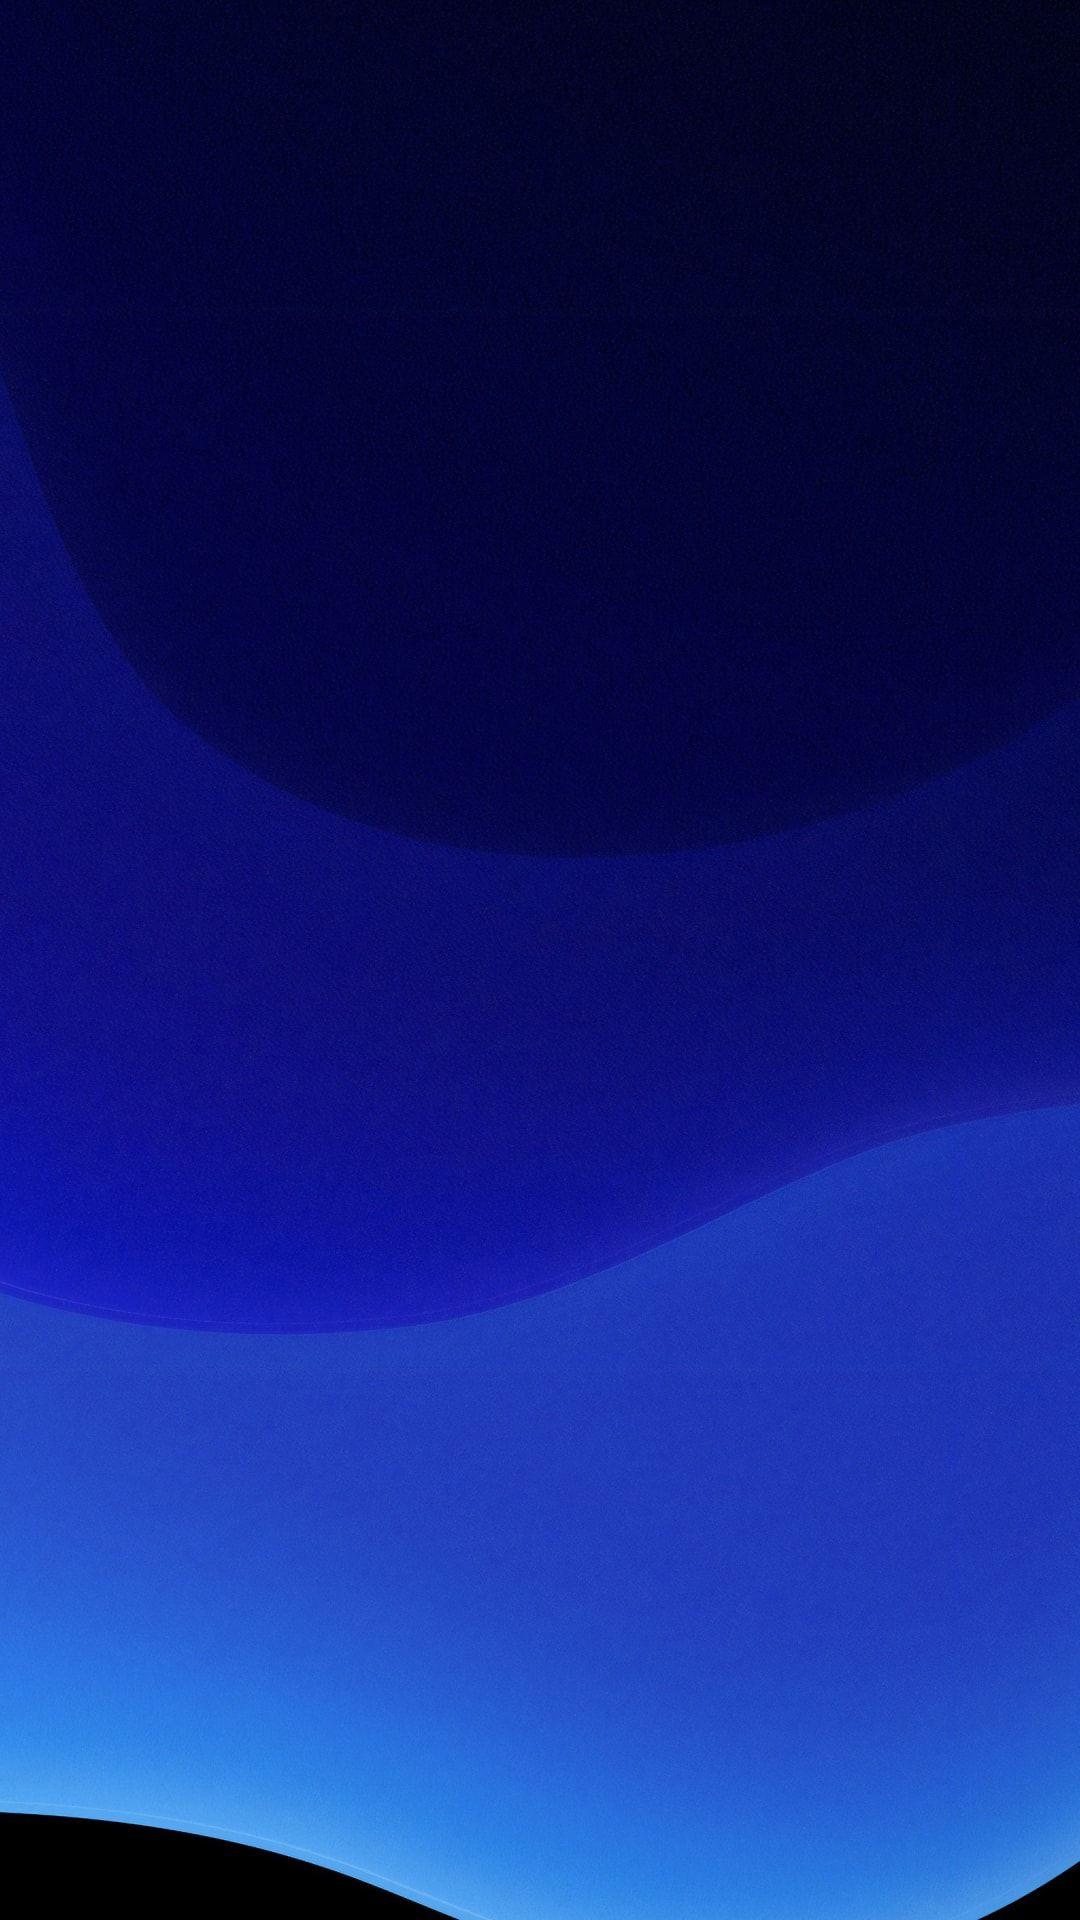 30+ Light Blue Samsung/Galaxy J7 (720x1280) Wallpapers - Mobile Abyss